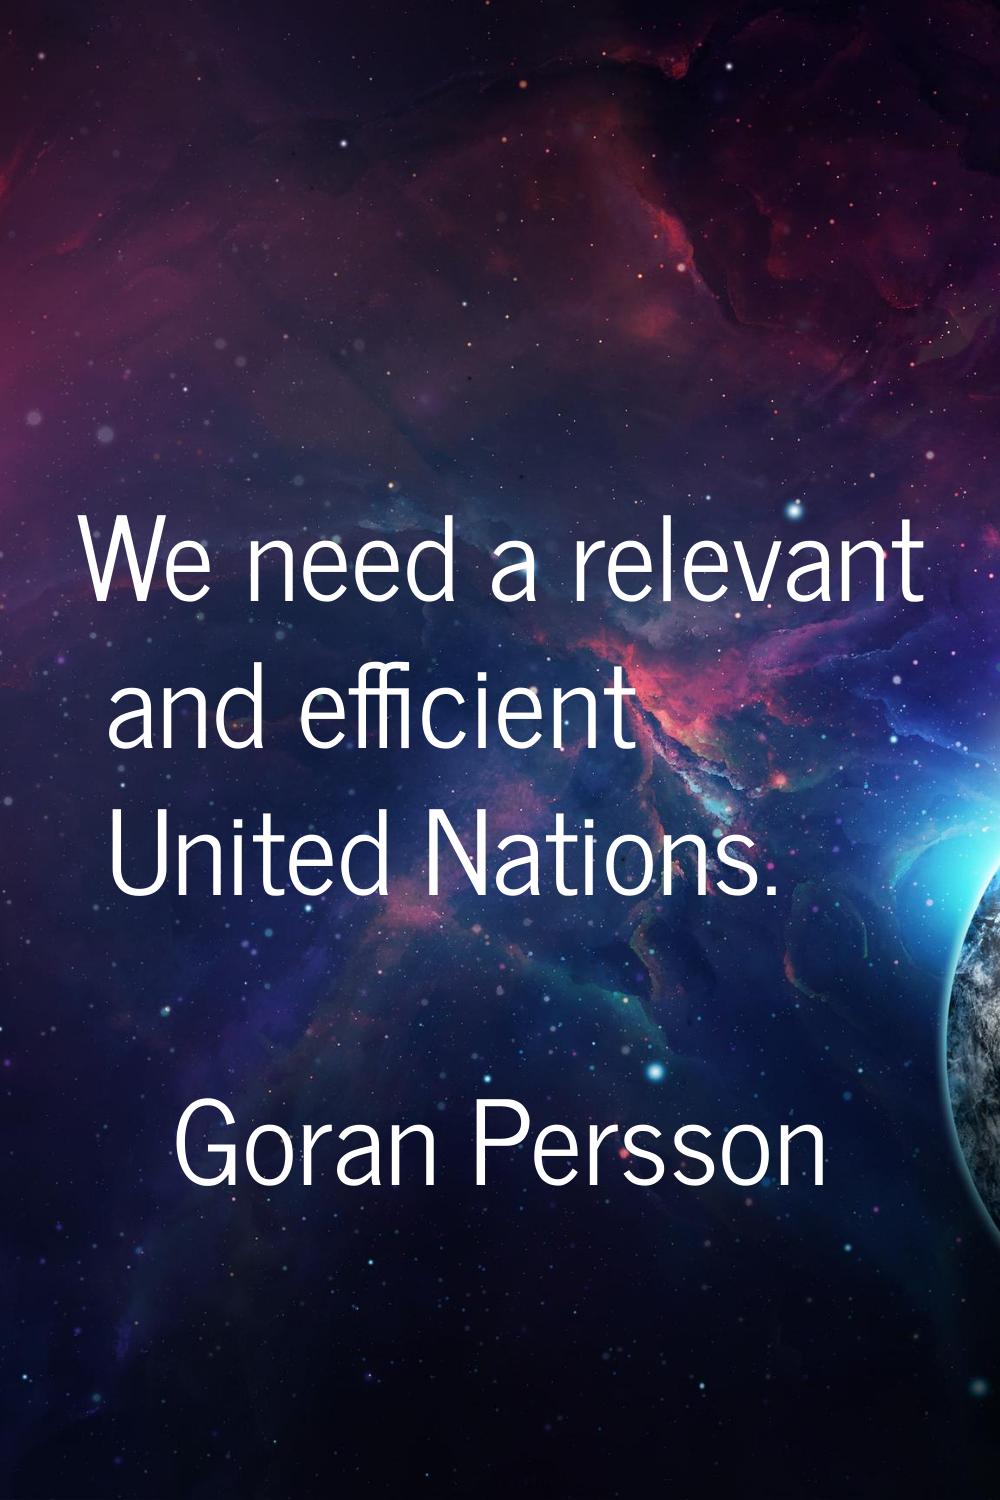 We need a relevant and efficient United Nations.